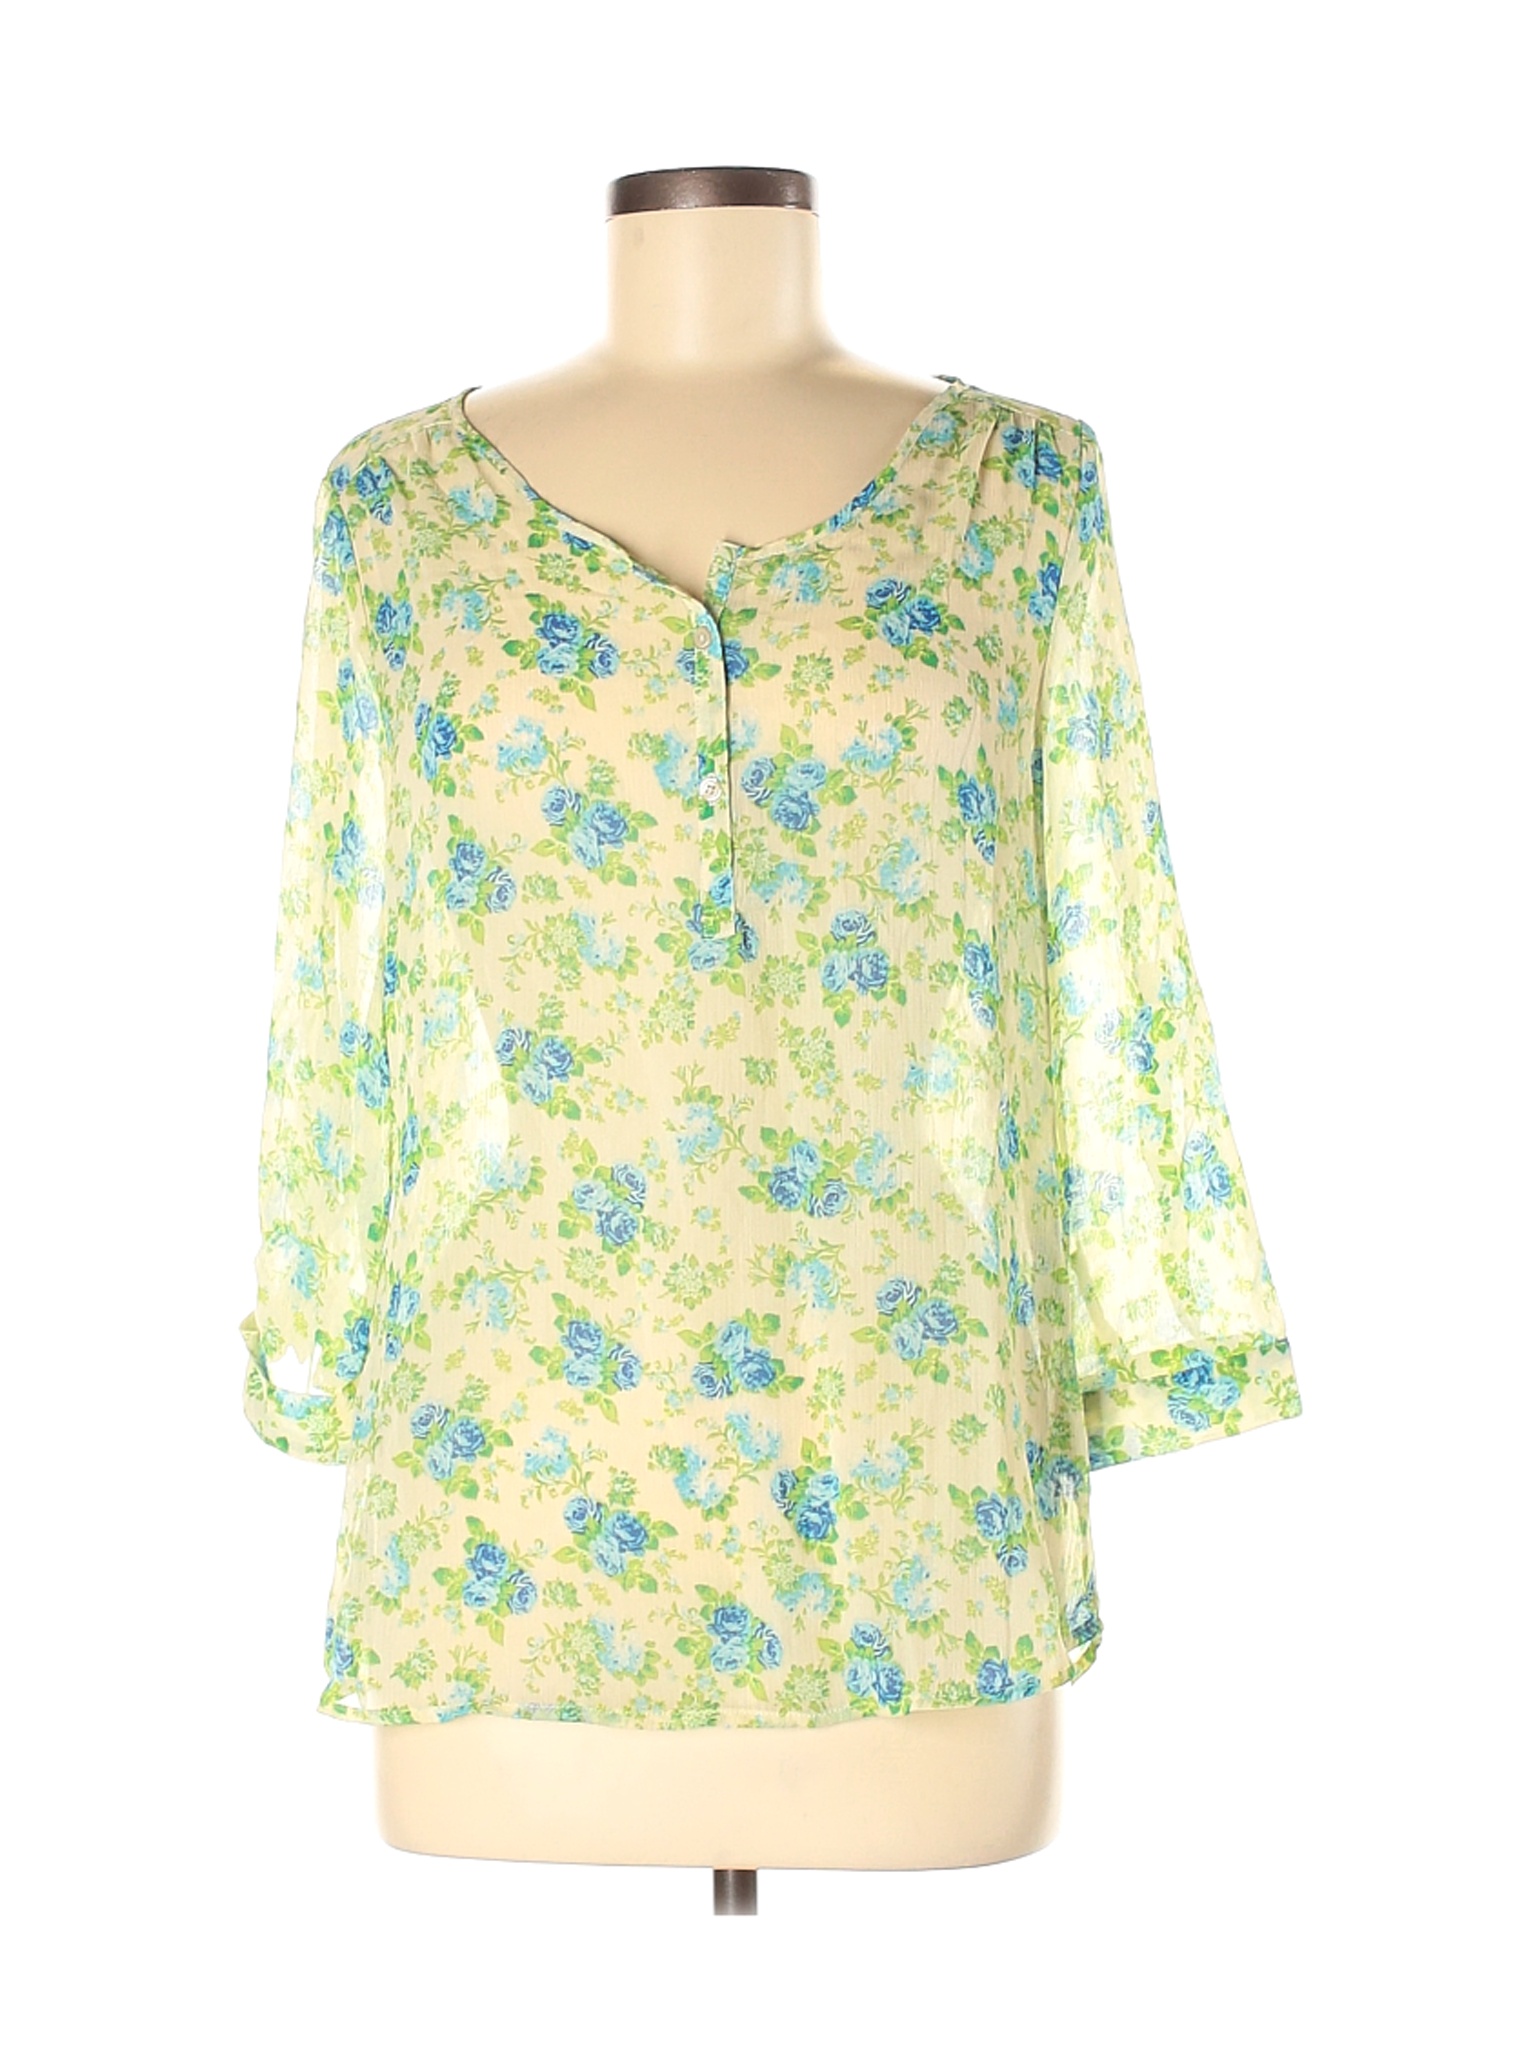 Bobbie Brooks 100% Polyester Floral Green 3/4 Sleeve Blouse Size M - 62 ...